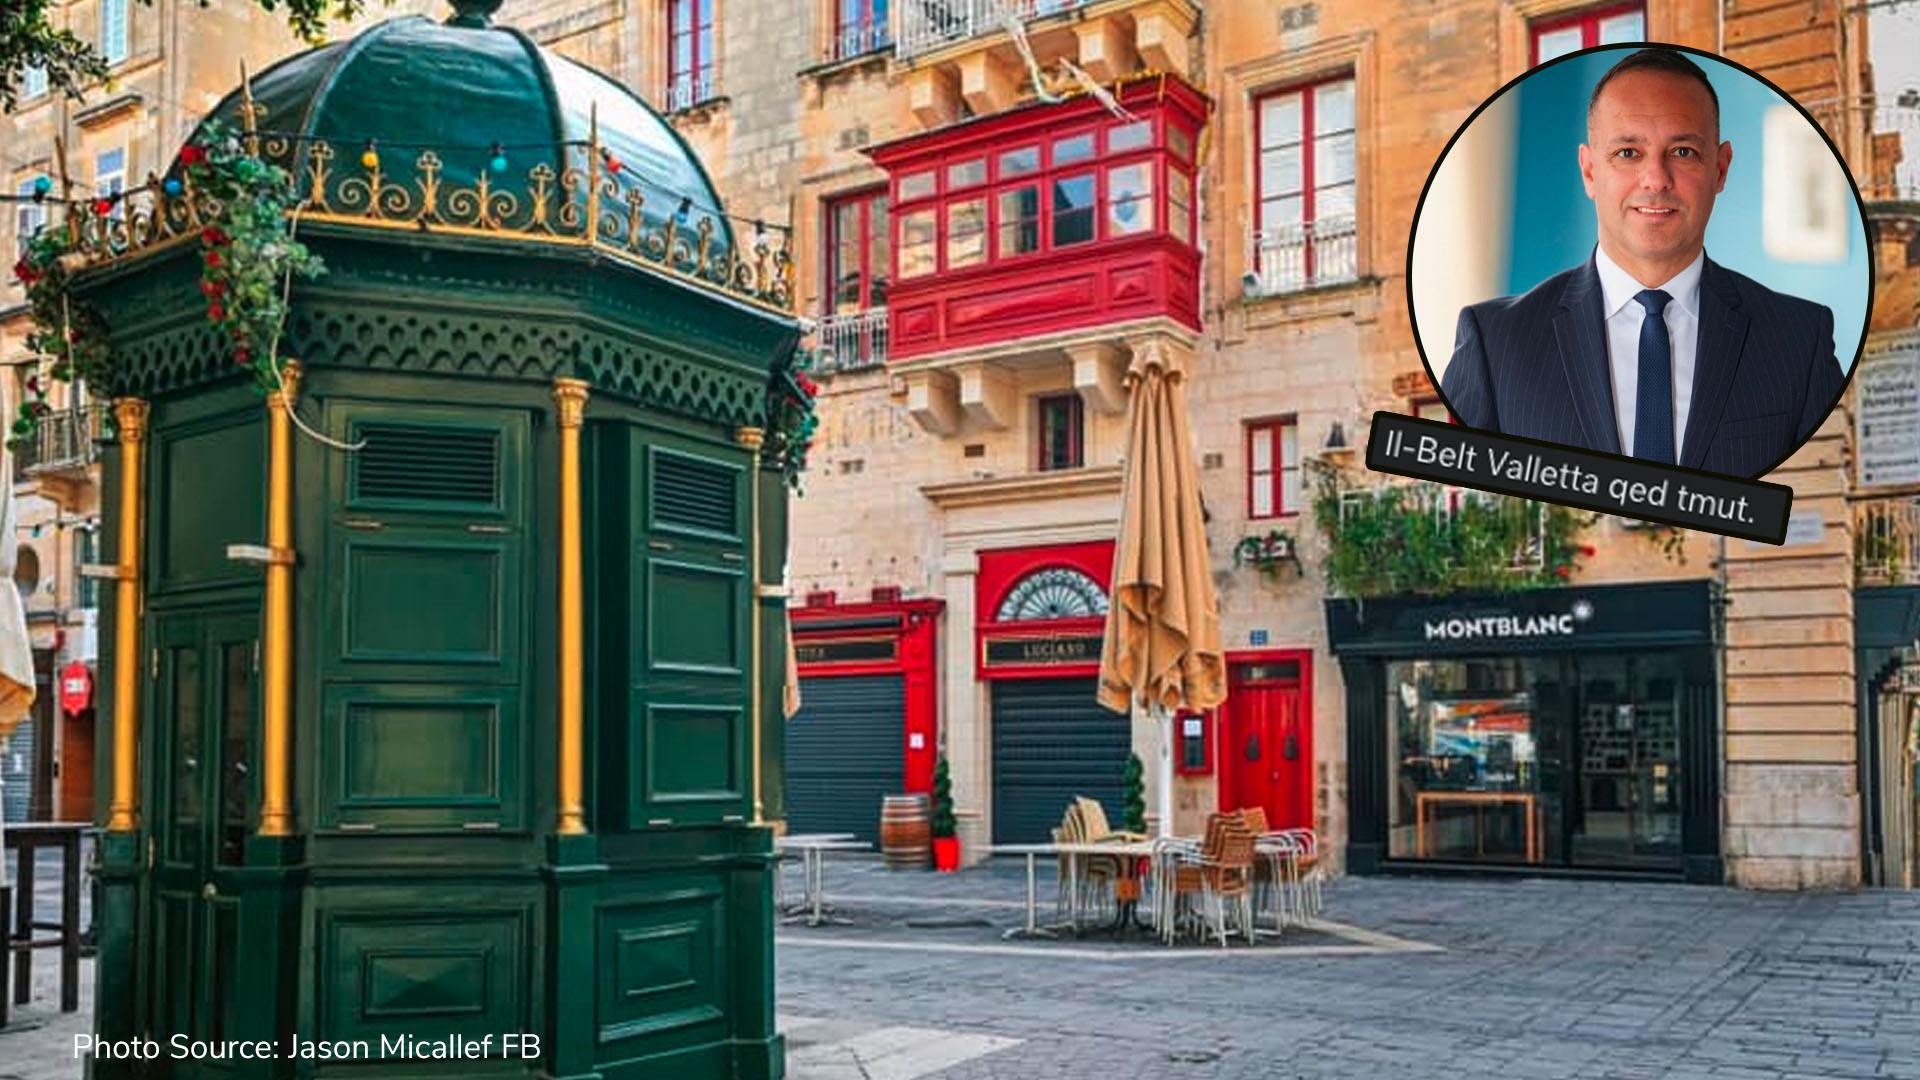 ‘Restaurants in Valletta should open by 3rd May’ says VCA Chairman Jason Micallef